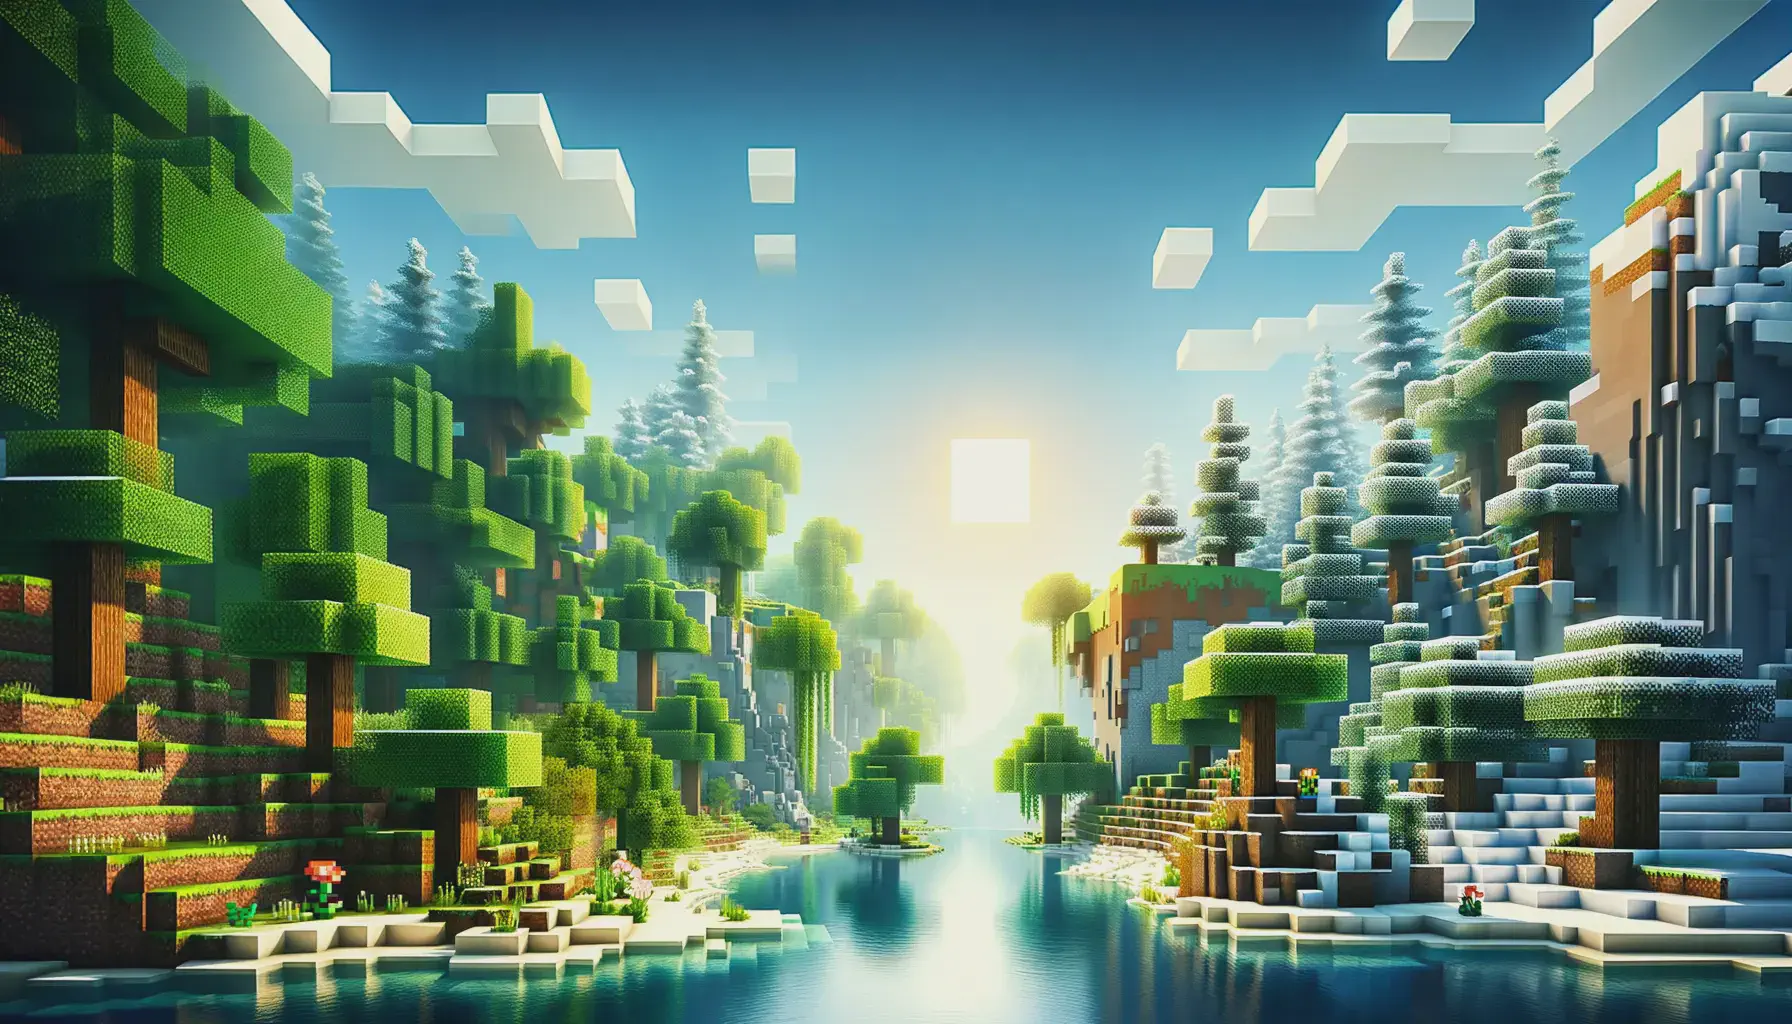 A Minecraft scene with a river and trees.